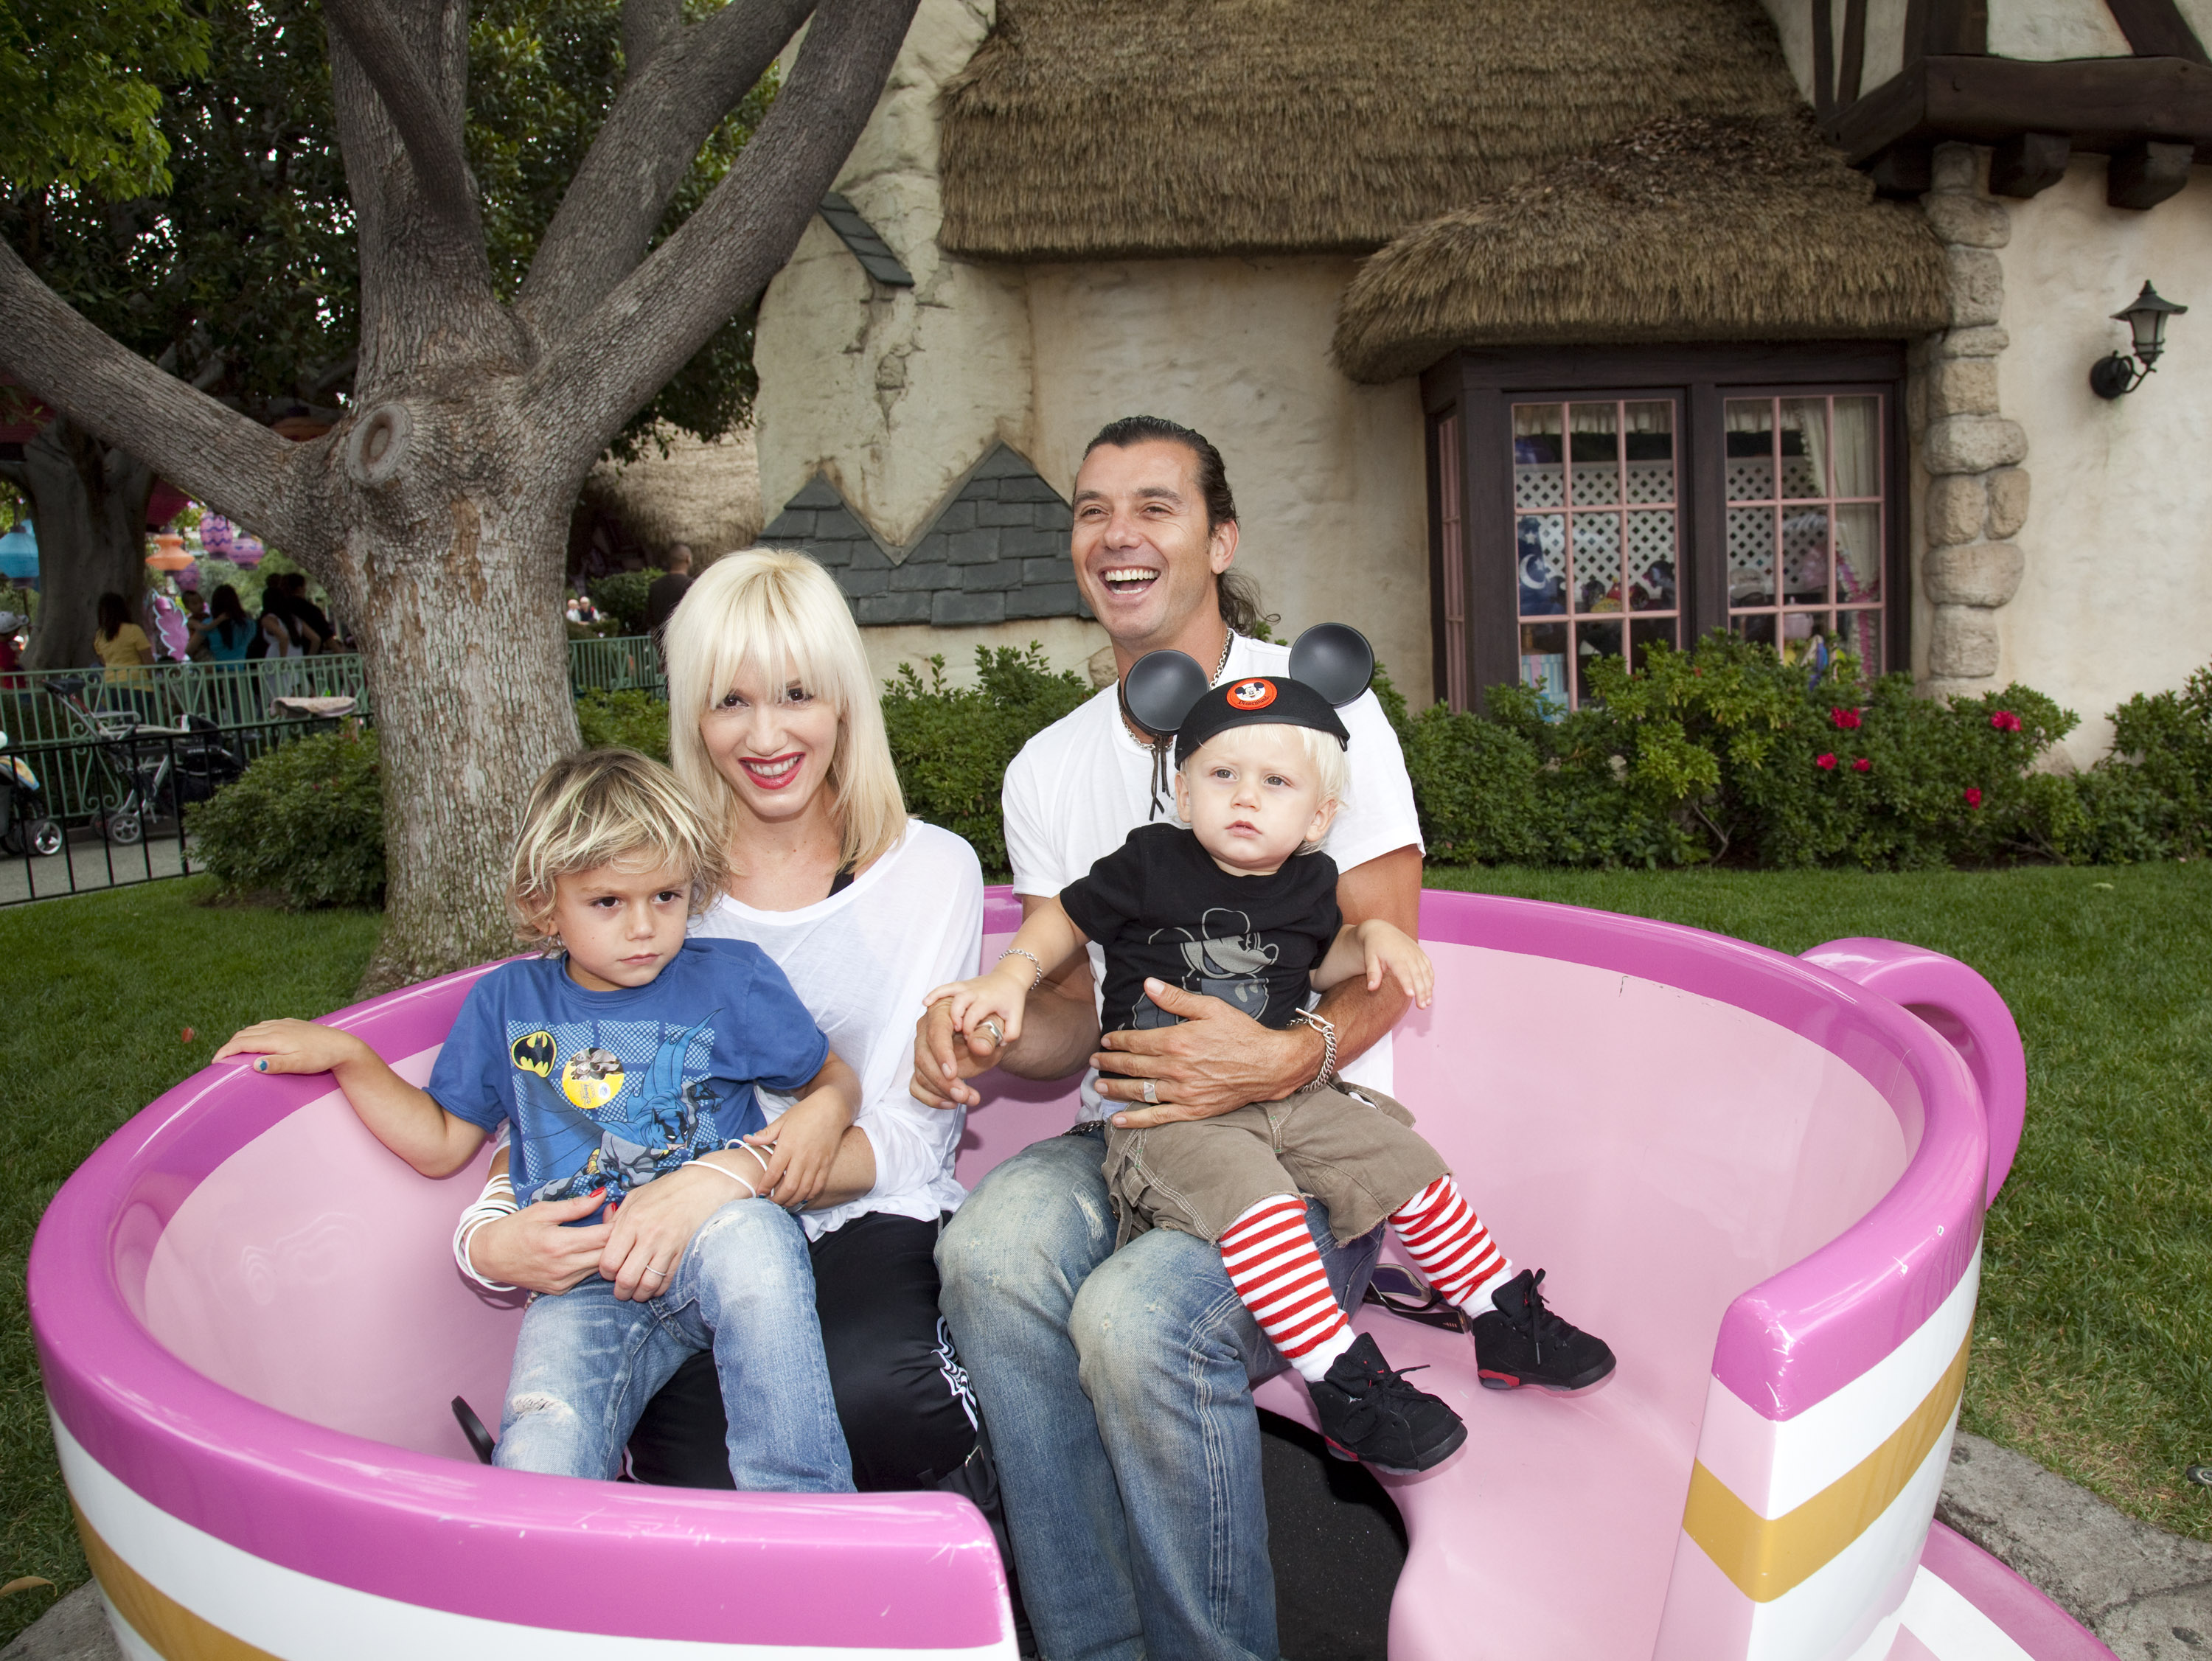 Gwen Stefani and Gavin Rossdale, accompanied by their children Kingston, 4, and Zuma, 1, enjoy a visit to the Mad Tea Party attraction at Disneyland on July 7, 2010, in Anaheim, California | Source: Getty Images